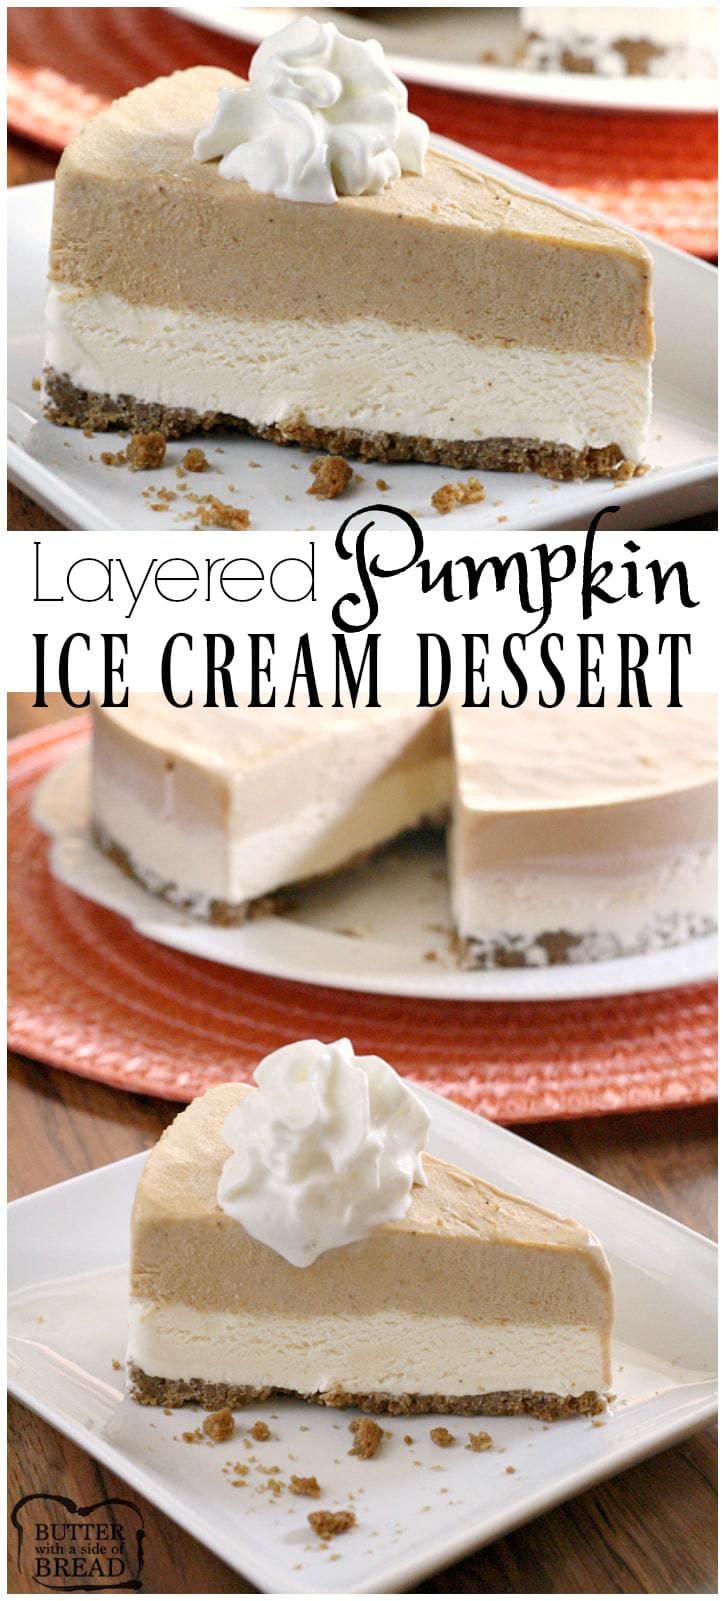 Layered Pumpkin Ice Cream Dessert is a delicious way to enjoy your favorite flavors, with a gingerbread crust and layers of vanilla and pumpkin ice cream!